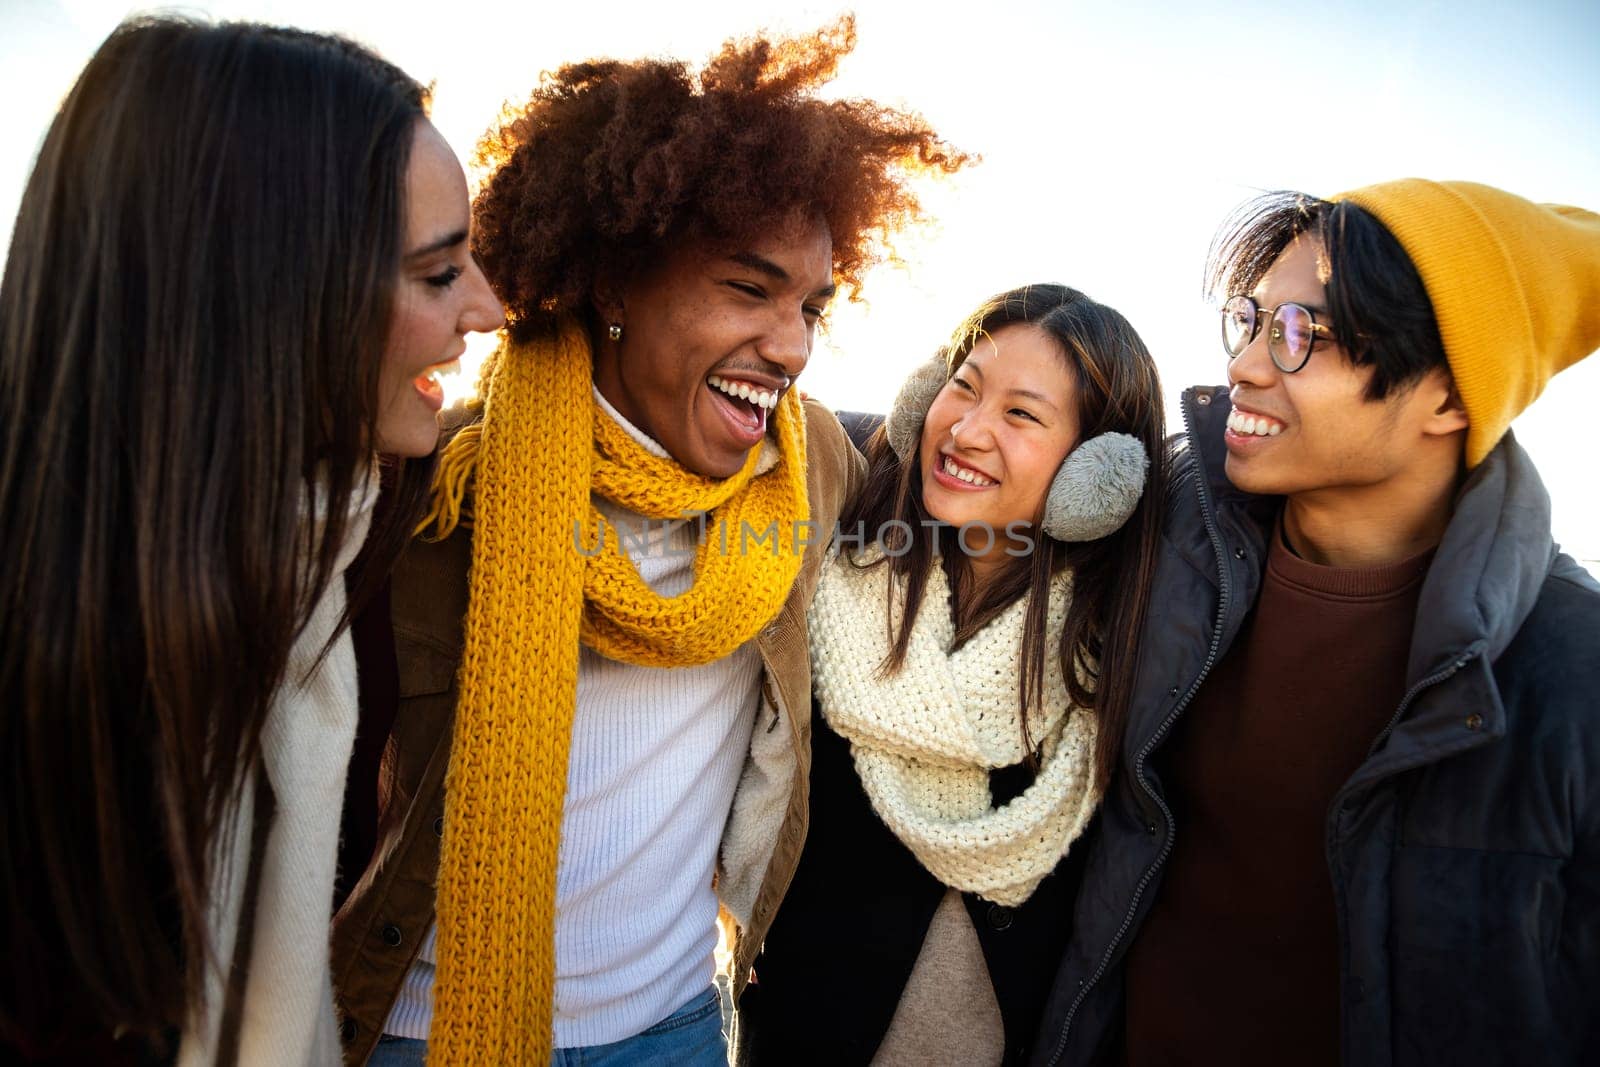 Multiethnic college student friends enjoying sunny winter day together. Young happy people embracing having fun outdoors talking and laughing.Lifestyle concept.